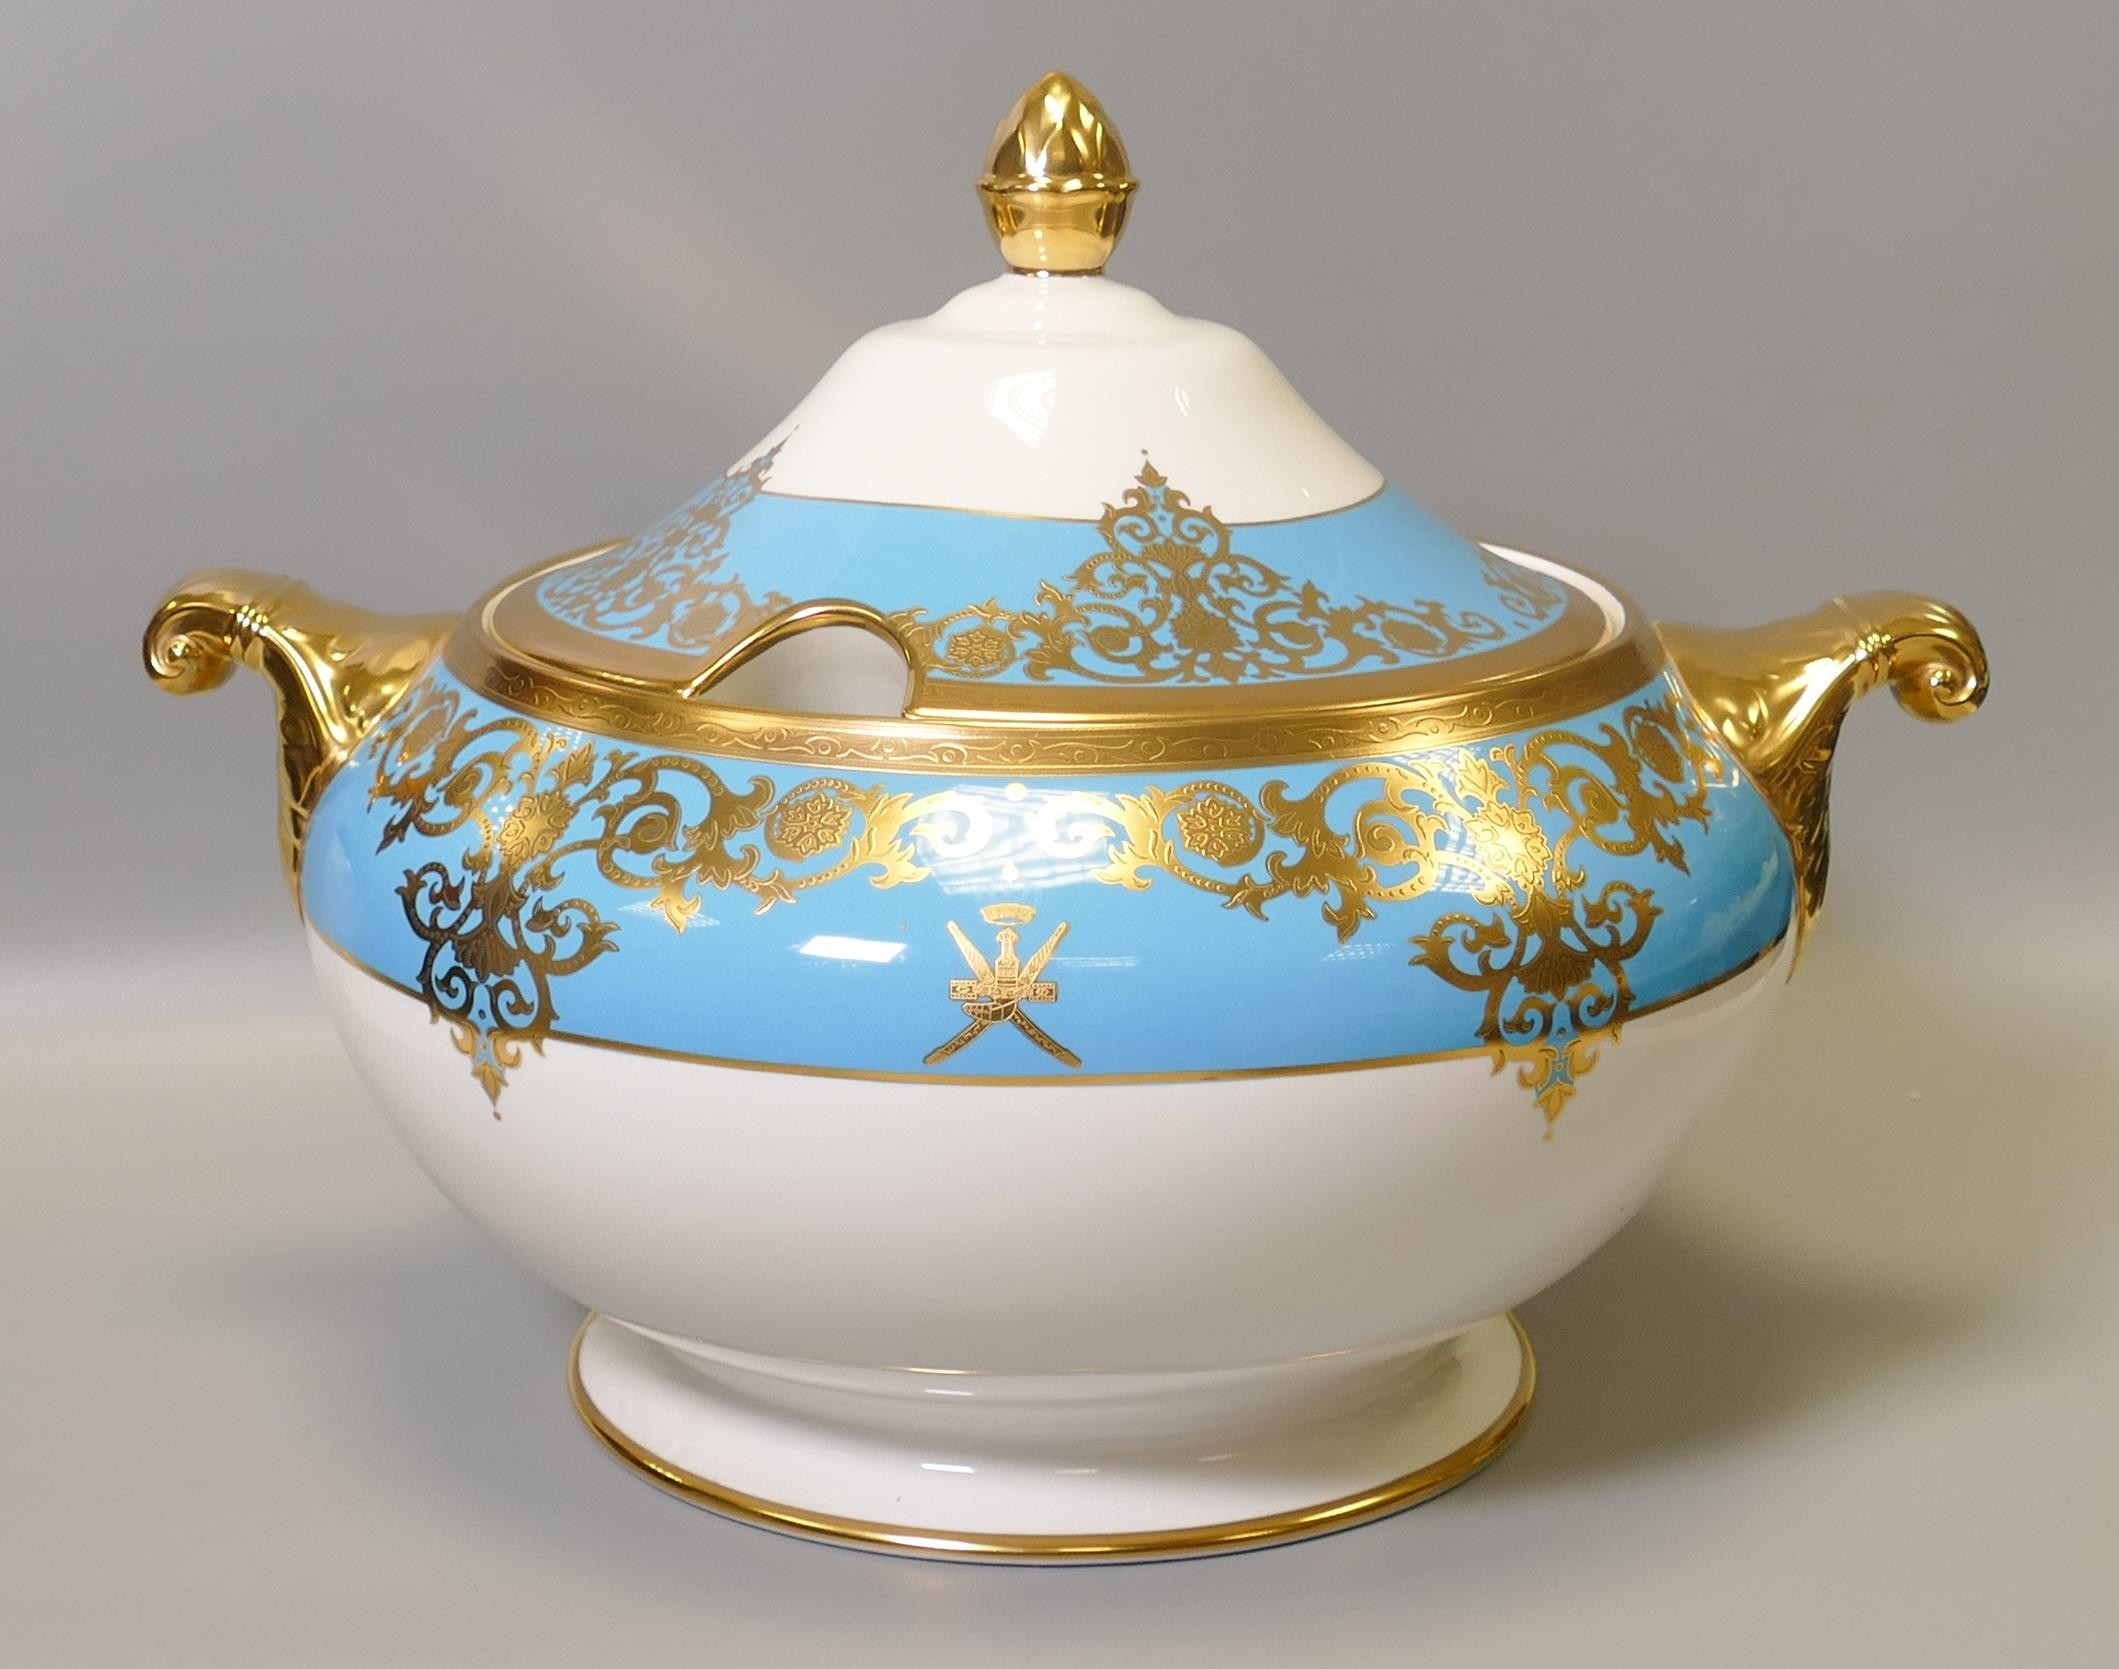 De Lamerie Fine Bone China heavily gilded Turquoise soup tureen with personalised family crest,